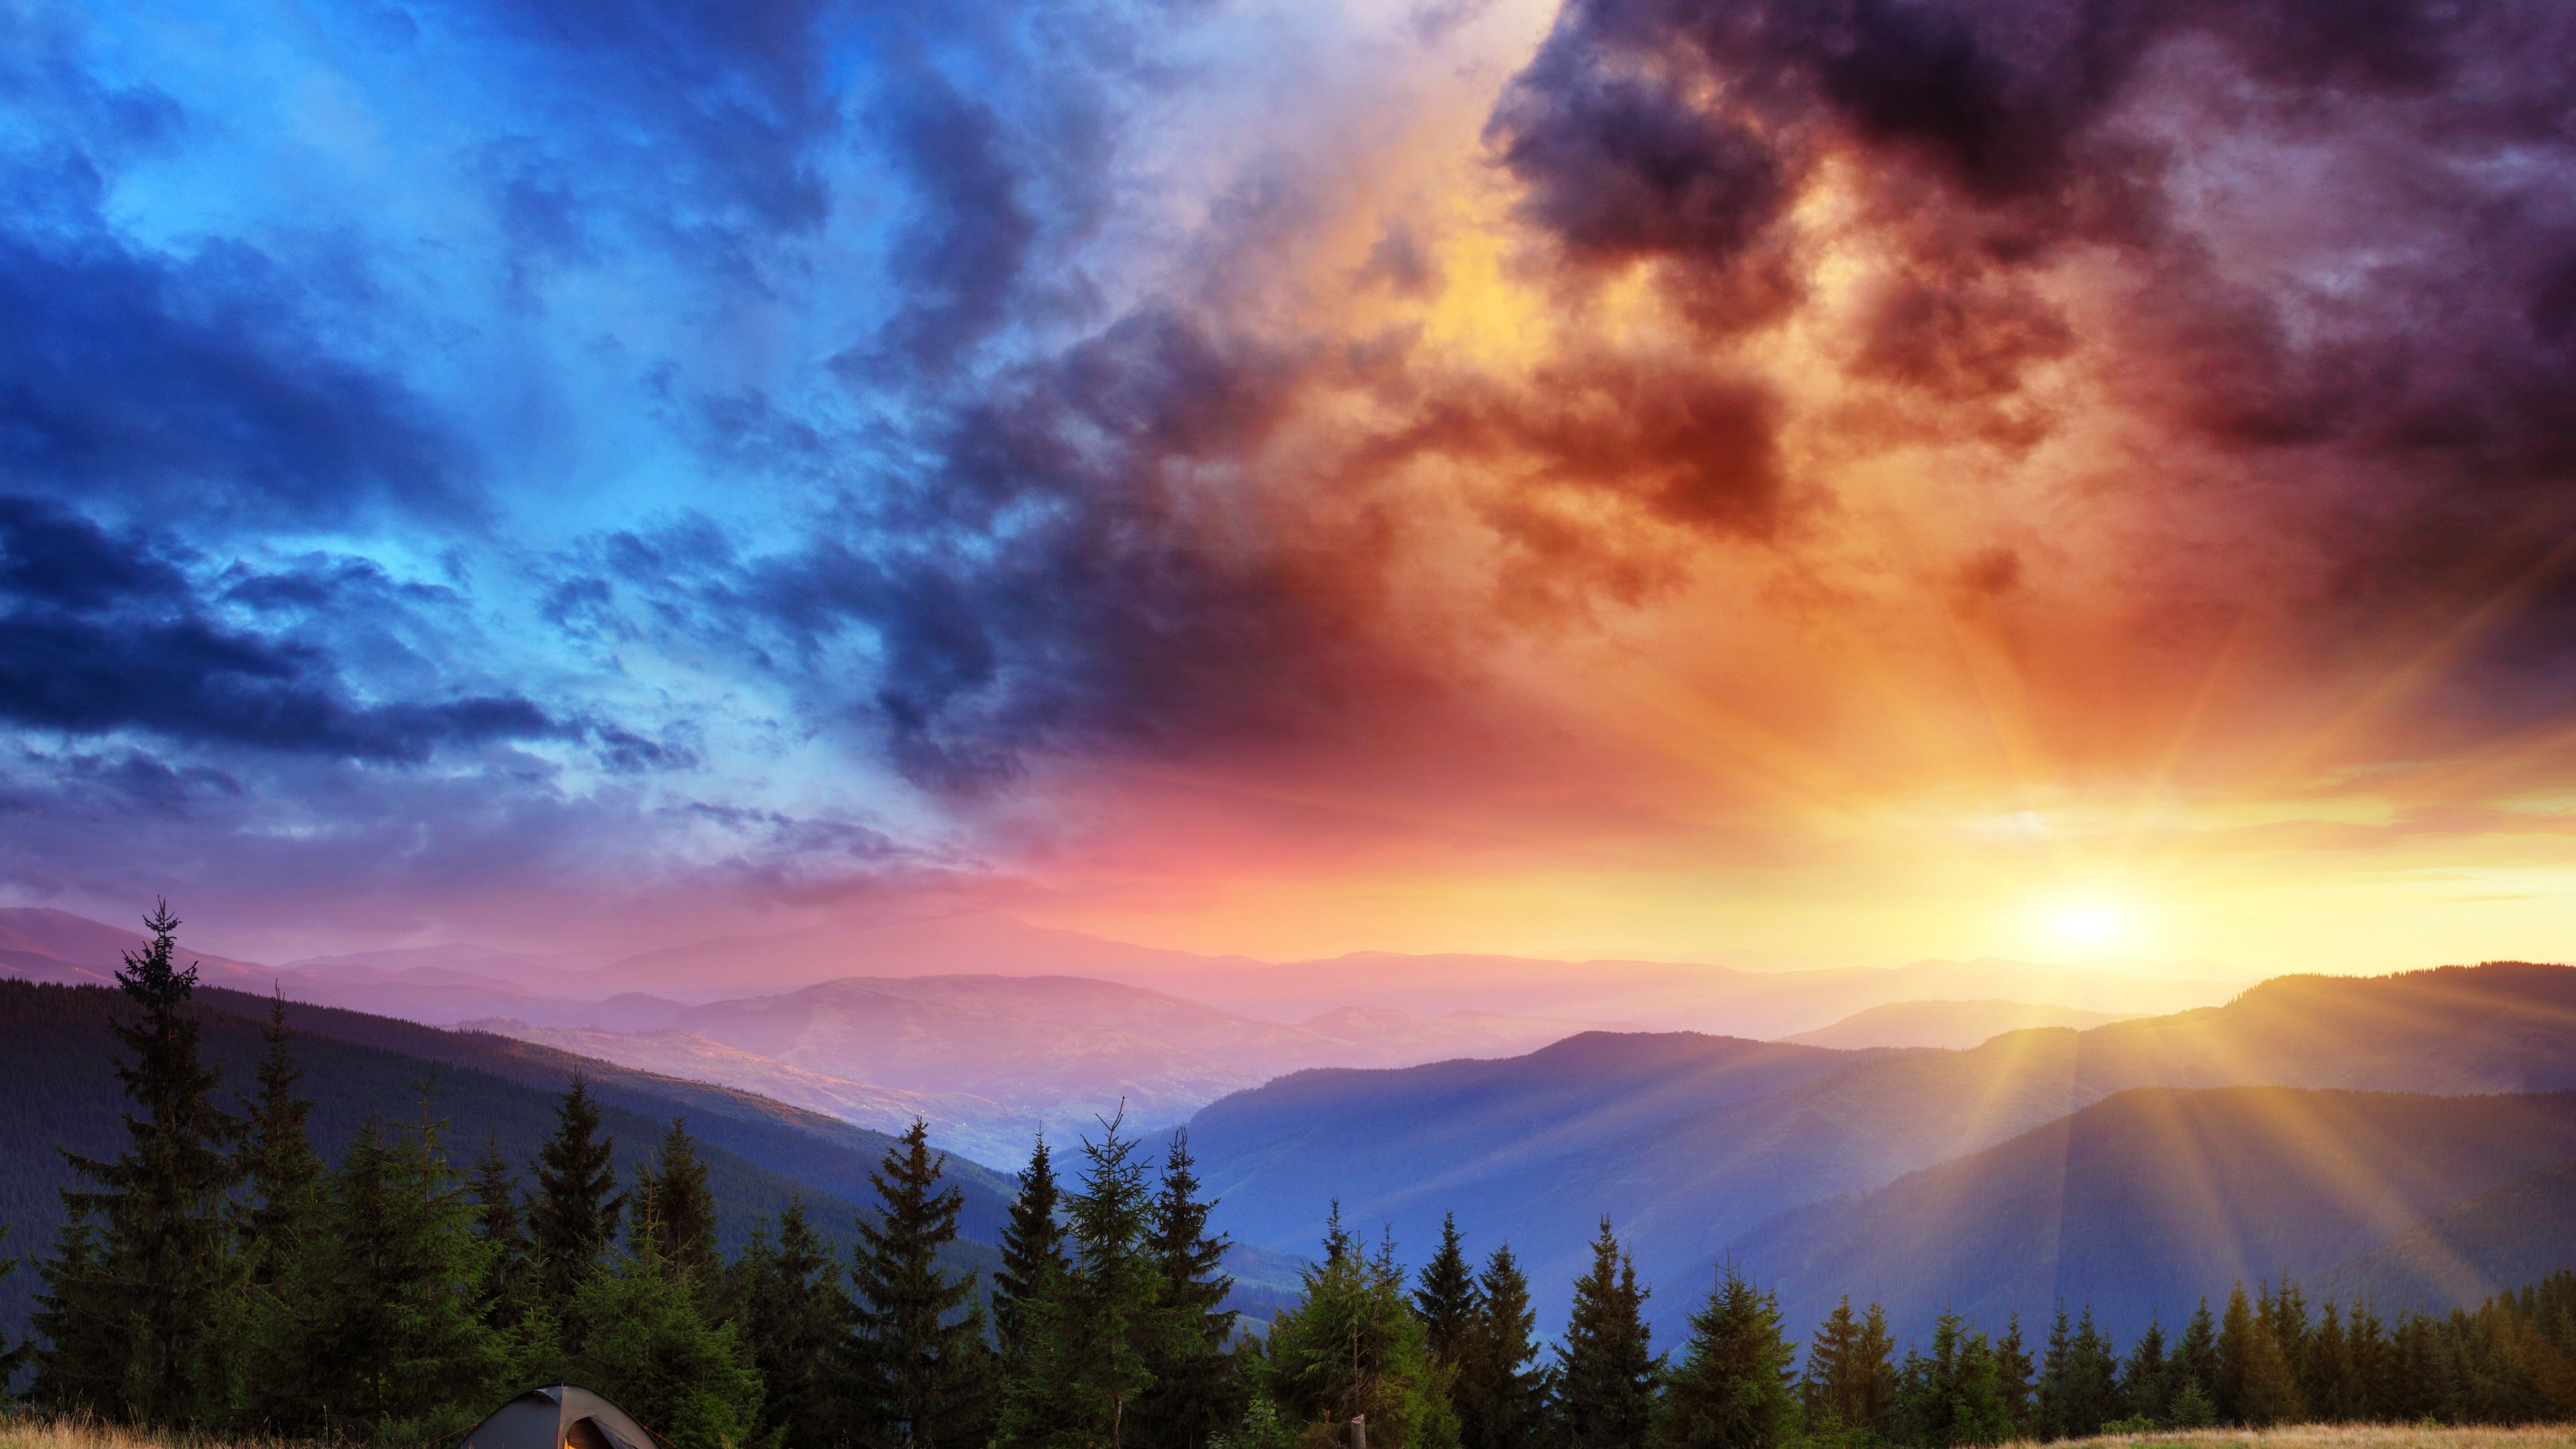 640+ Sunrise HD Wallpapers and Backgrounds